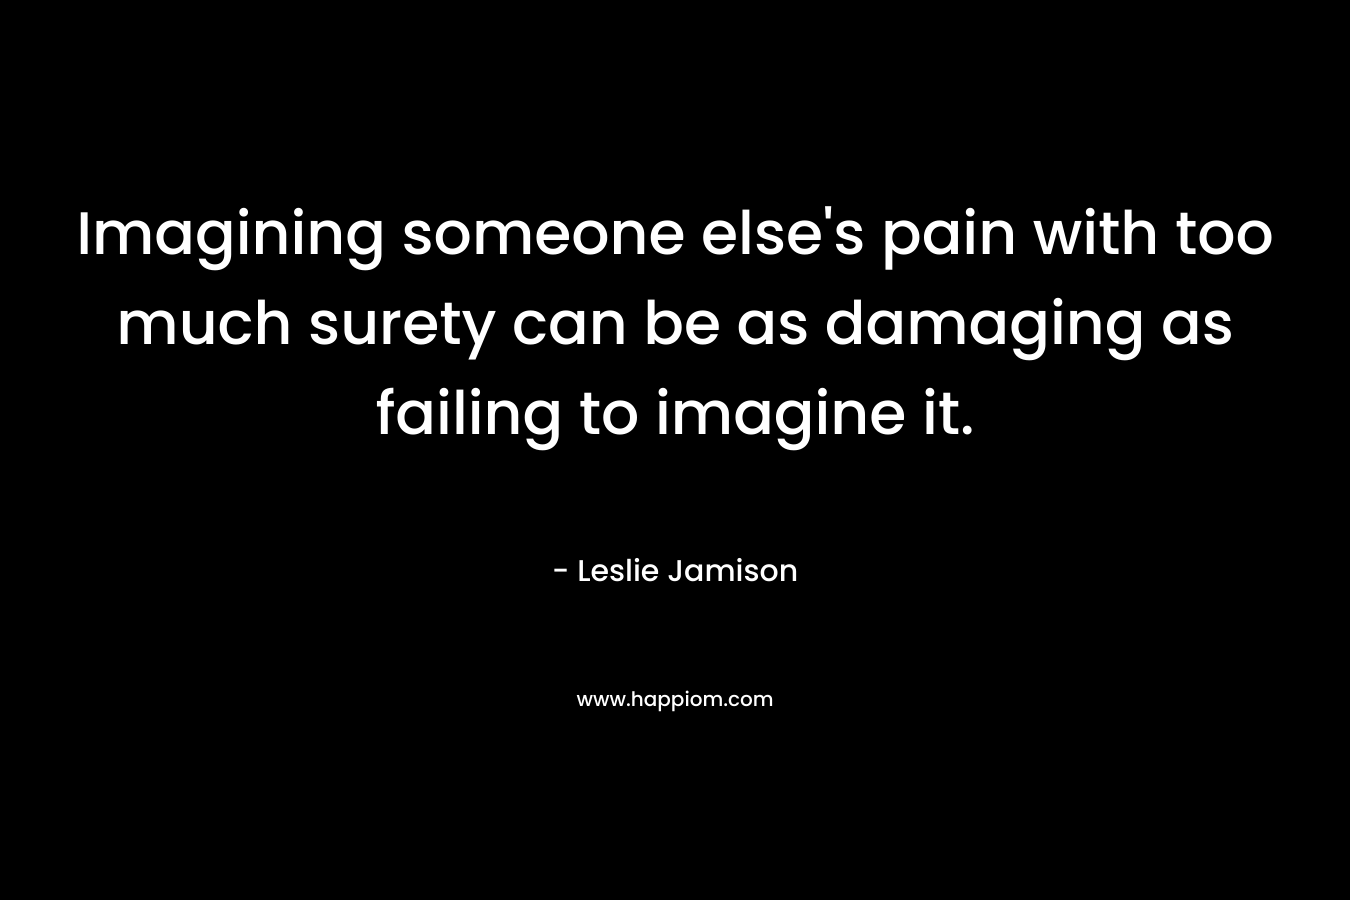 Imagining someone else’s pain with too much surety can be as damaging as failing to imagine it. – Leslie Jamison